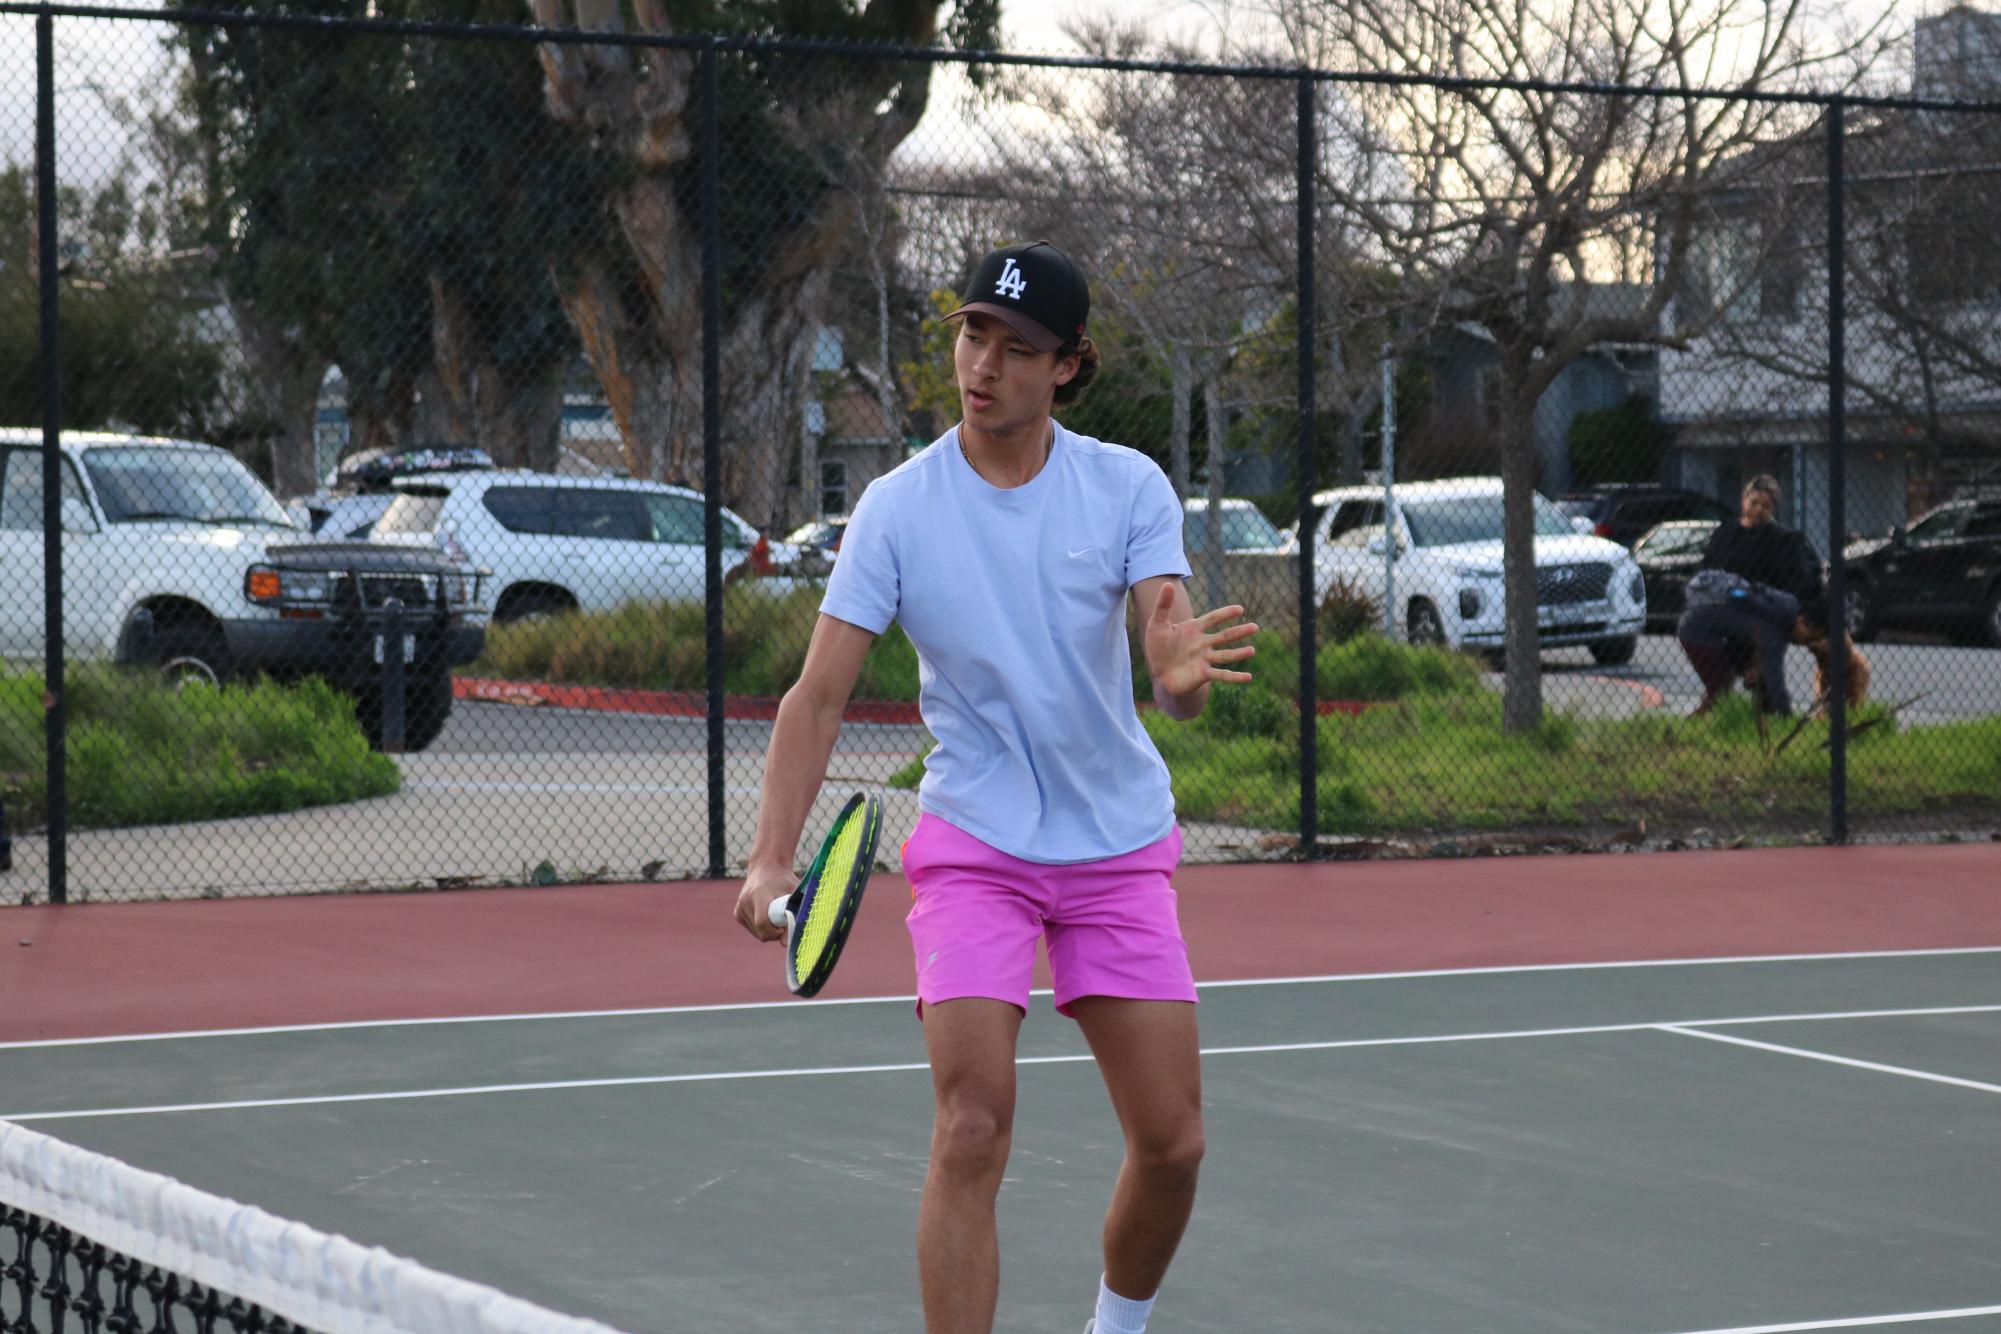 Junior Nicolas Moshkovoy hits a backhand volley while warming up for his tiebreaker on Wednesday, Feb. 21.
